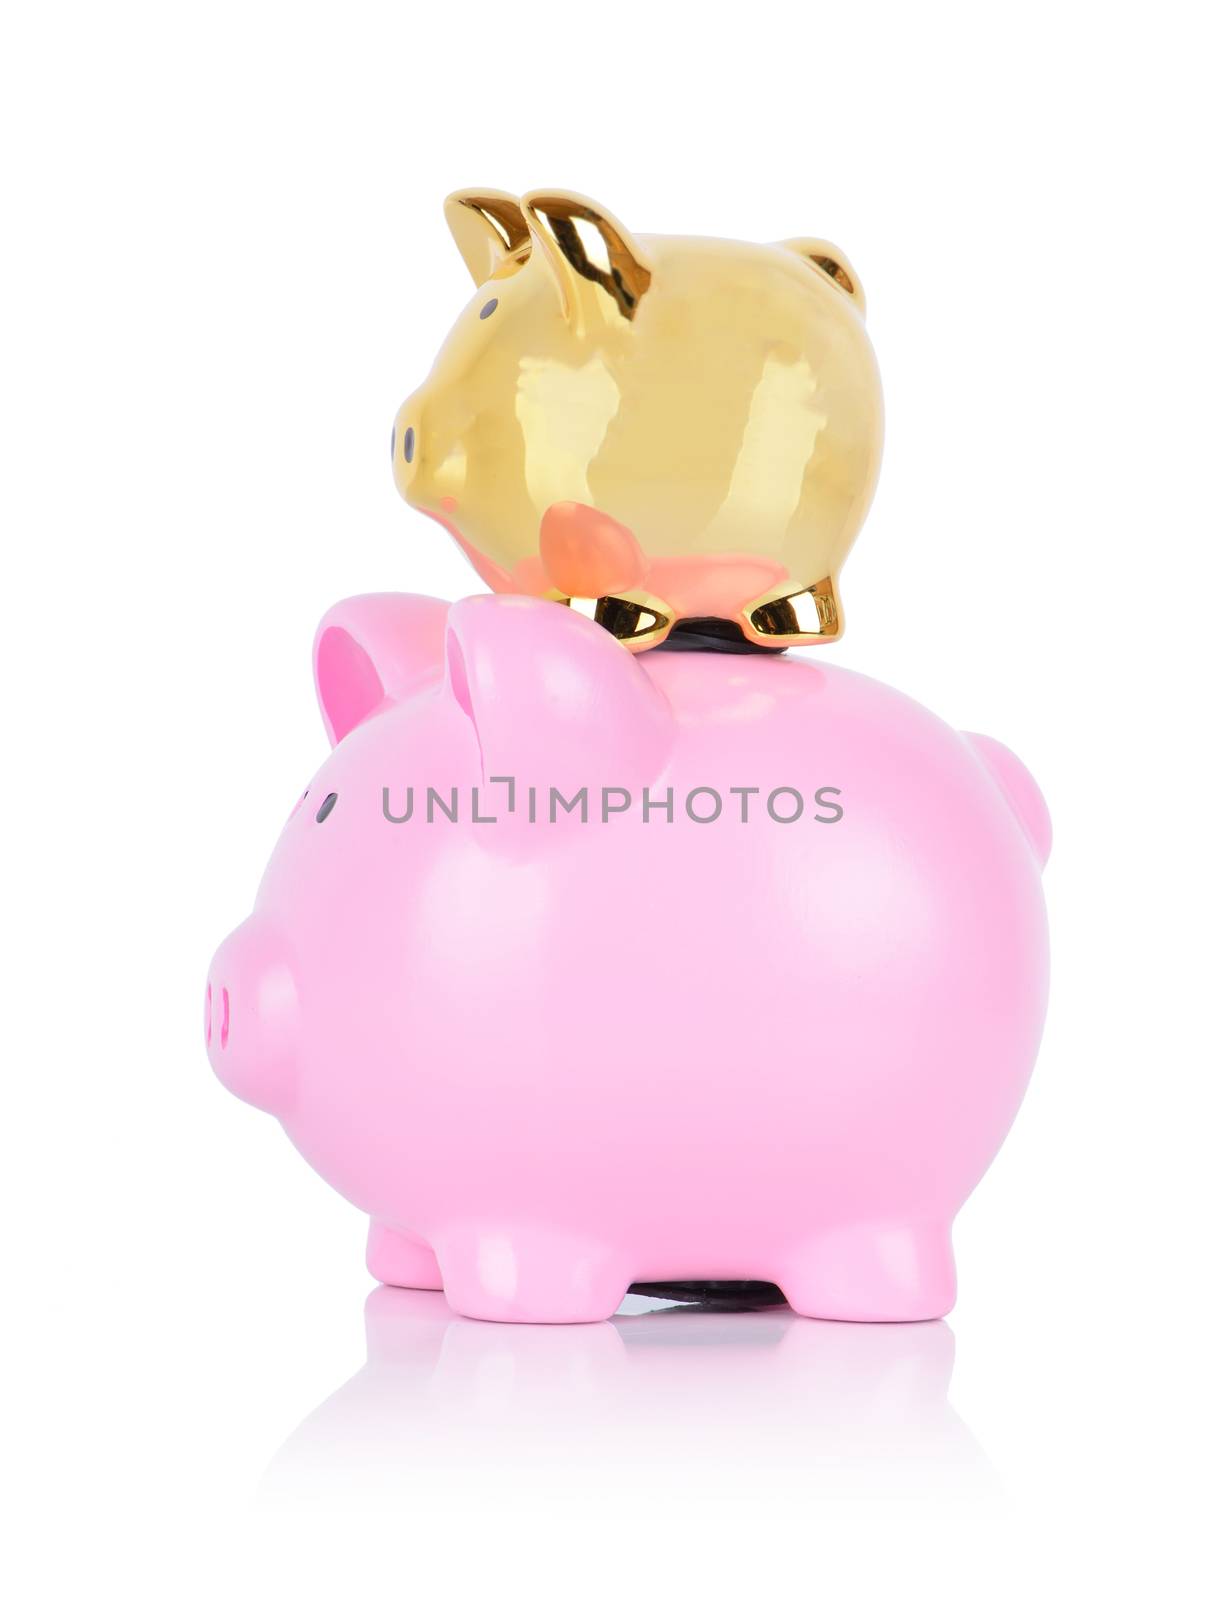 Gold pig wins over normal piggy bank concept of better investment